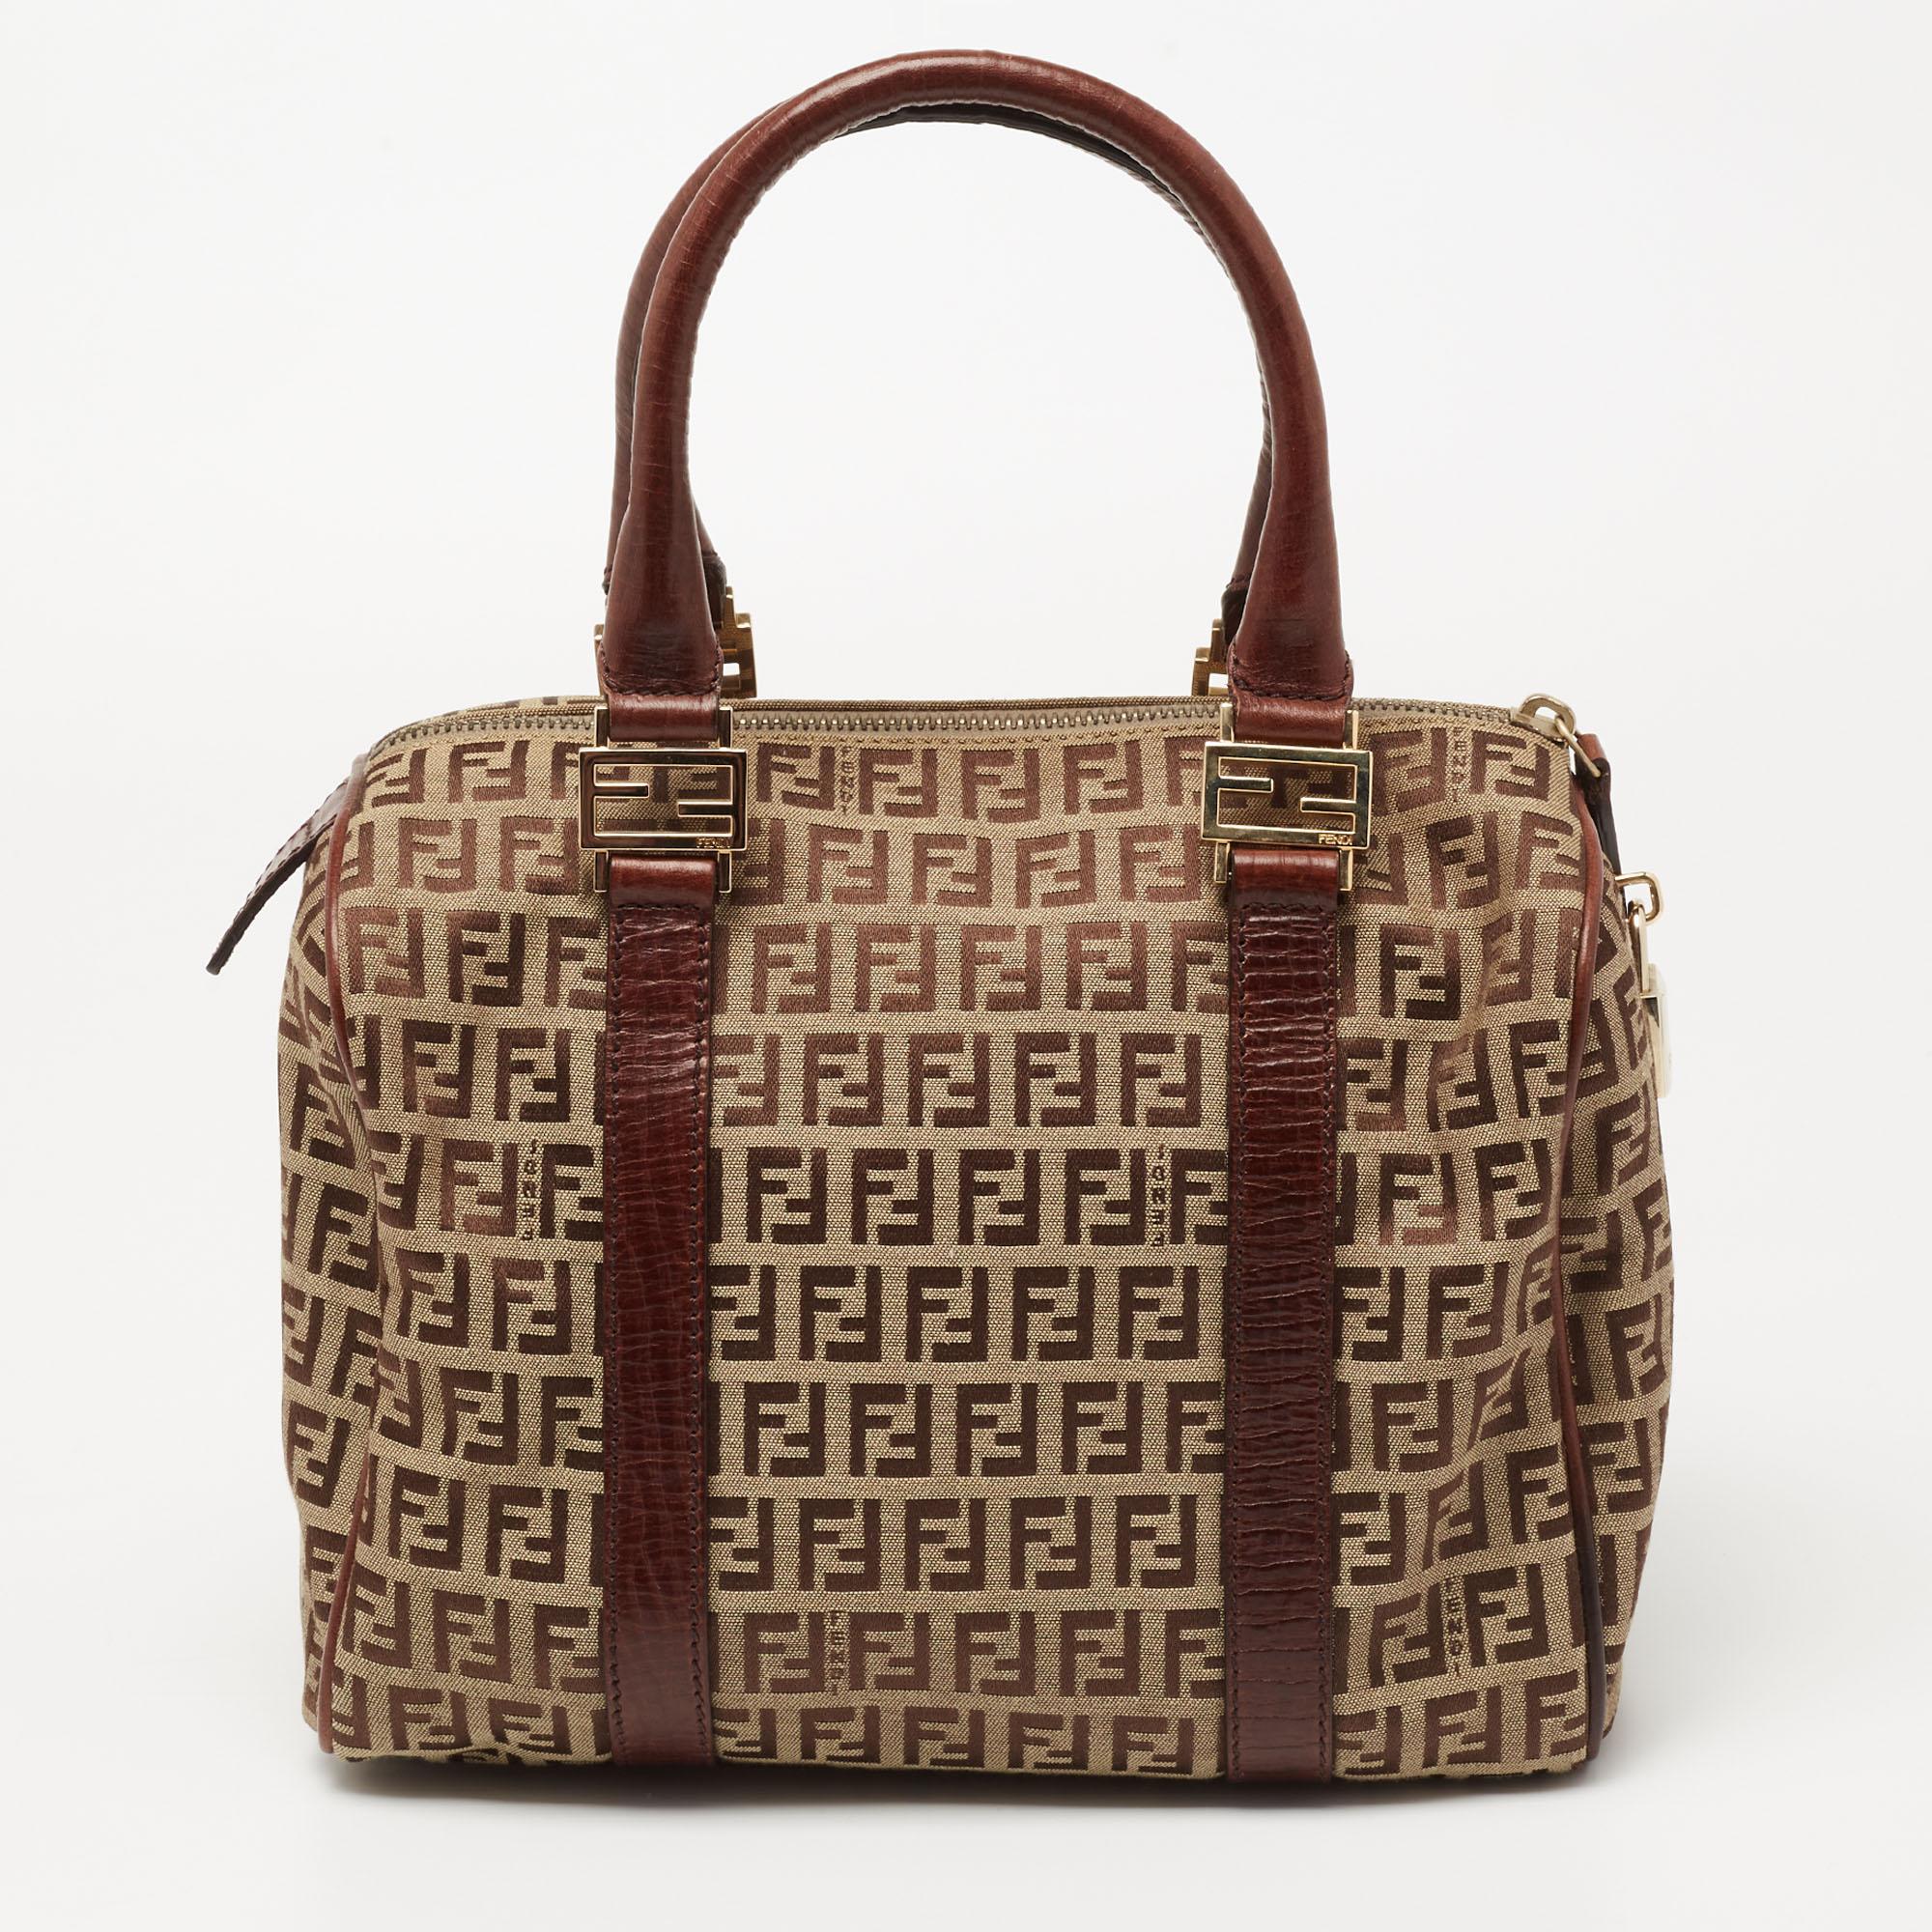 This Forever Bauletto bag from Fendi is the perfect bag you've been searching for, all this while! The brown and beige creation is crafted from Zucchino canvas and leather and features dual top handles that are detailed with gold-tone brand logo